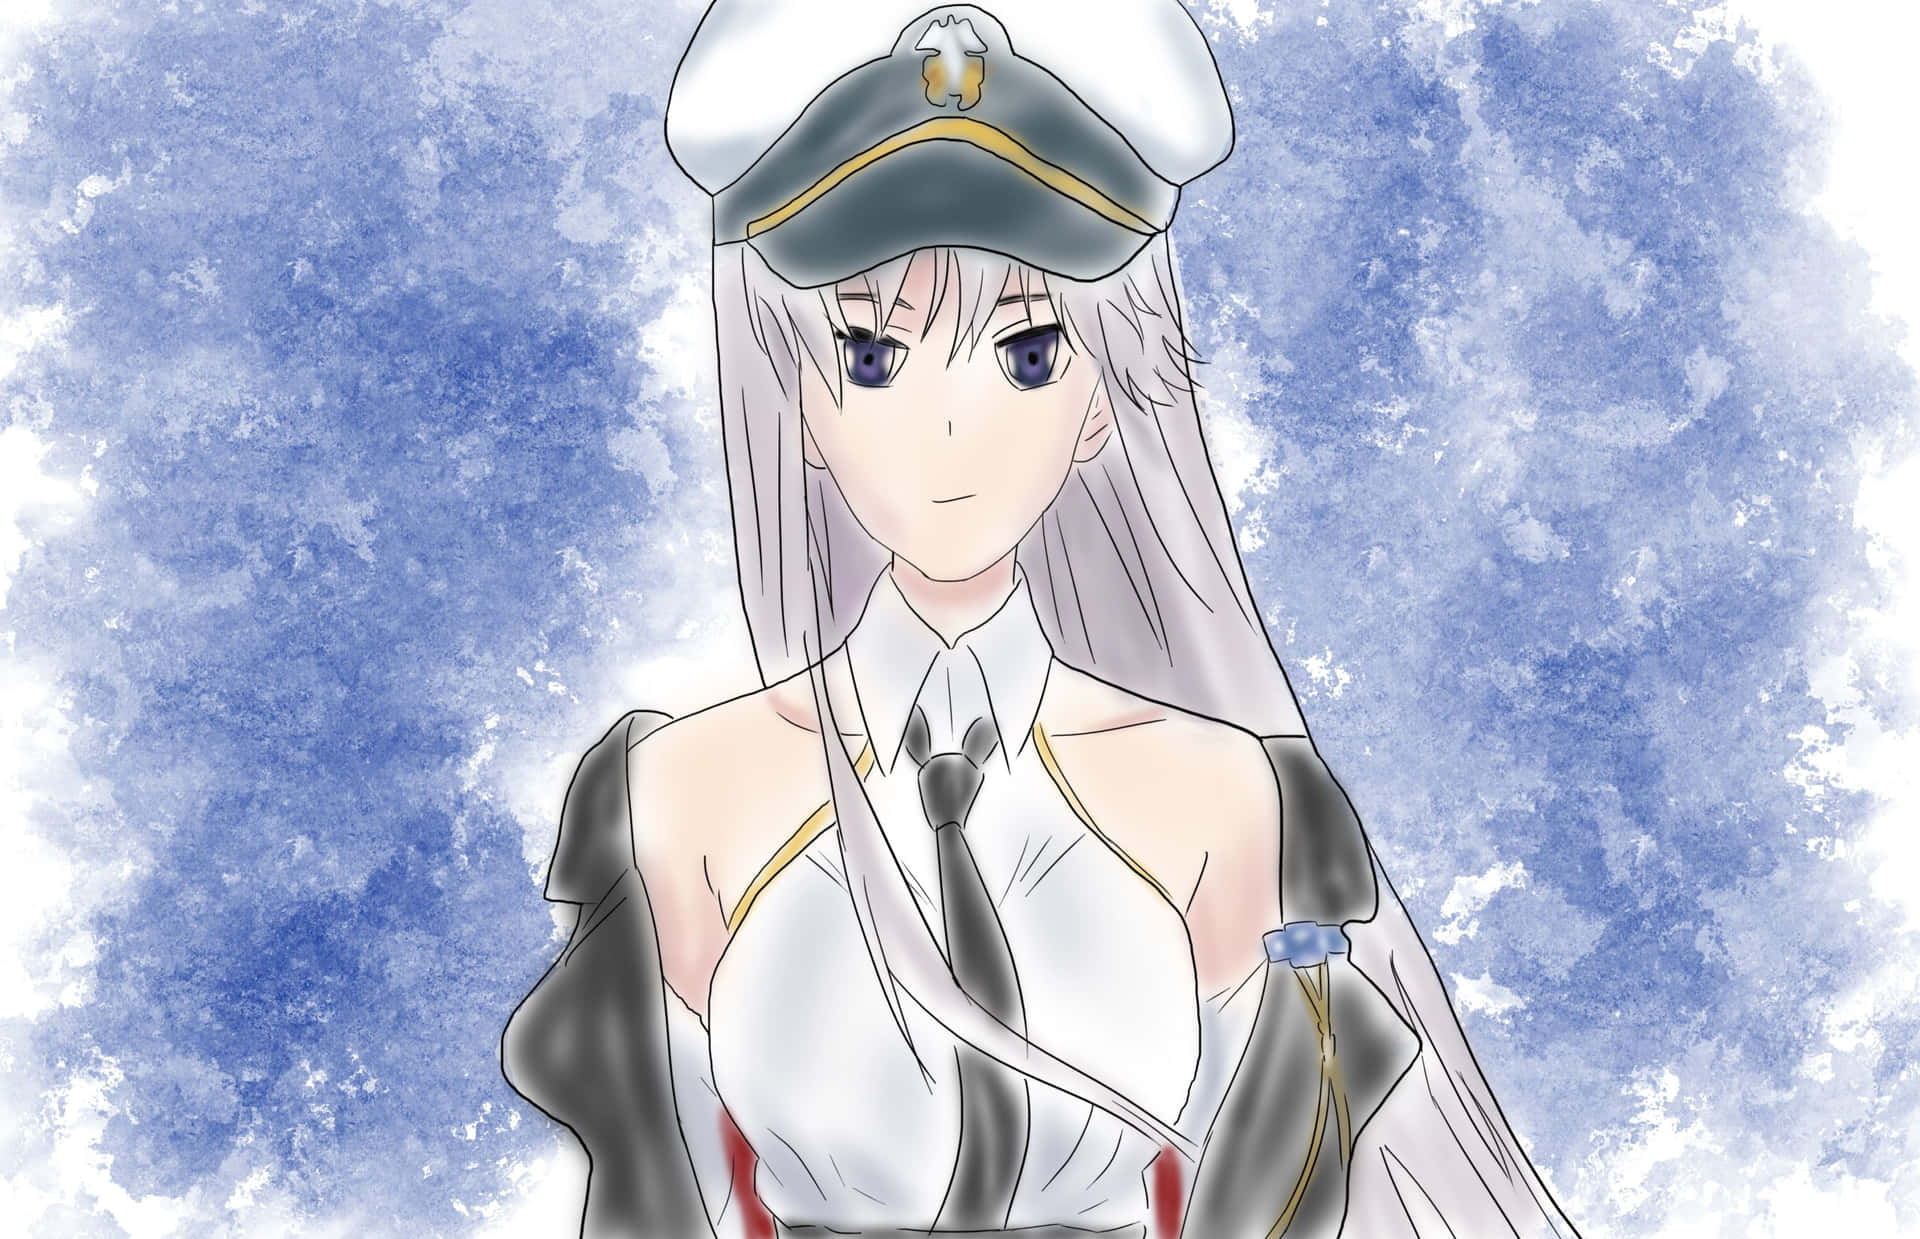 A Female Anime Character In A Hat And Uniform